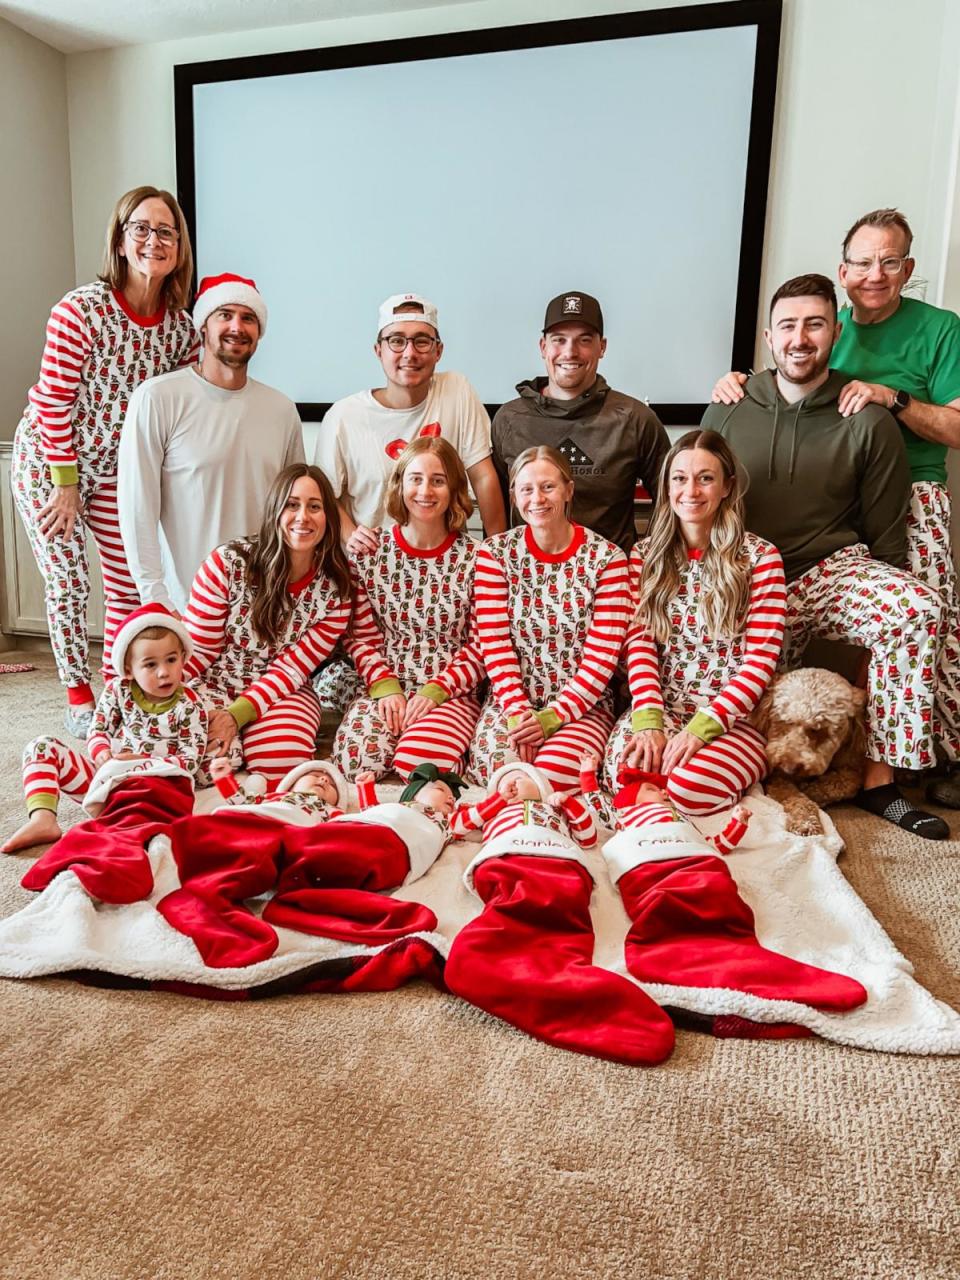 PHOTO: The family dressed up in matching Christmas Grinch pajamas this year. (Wildfire Photo Co.)